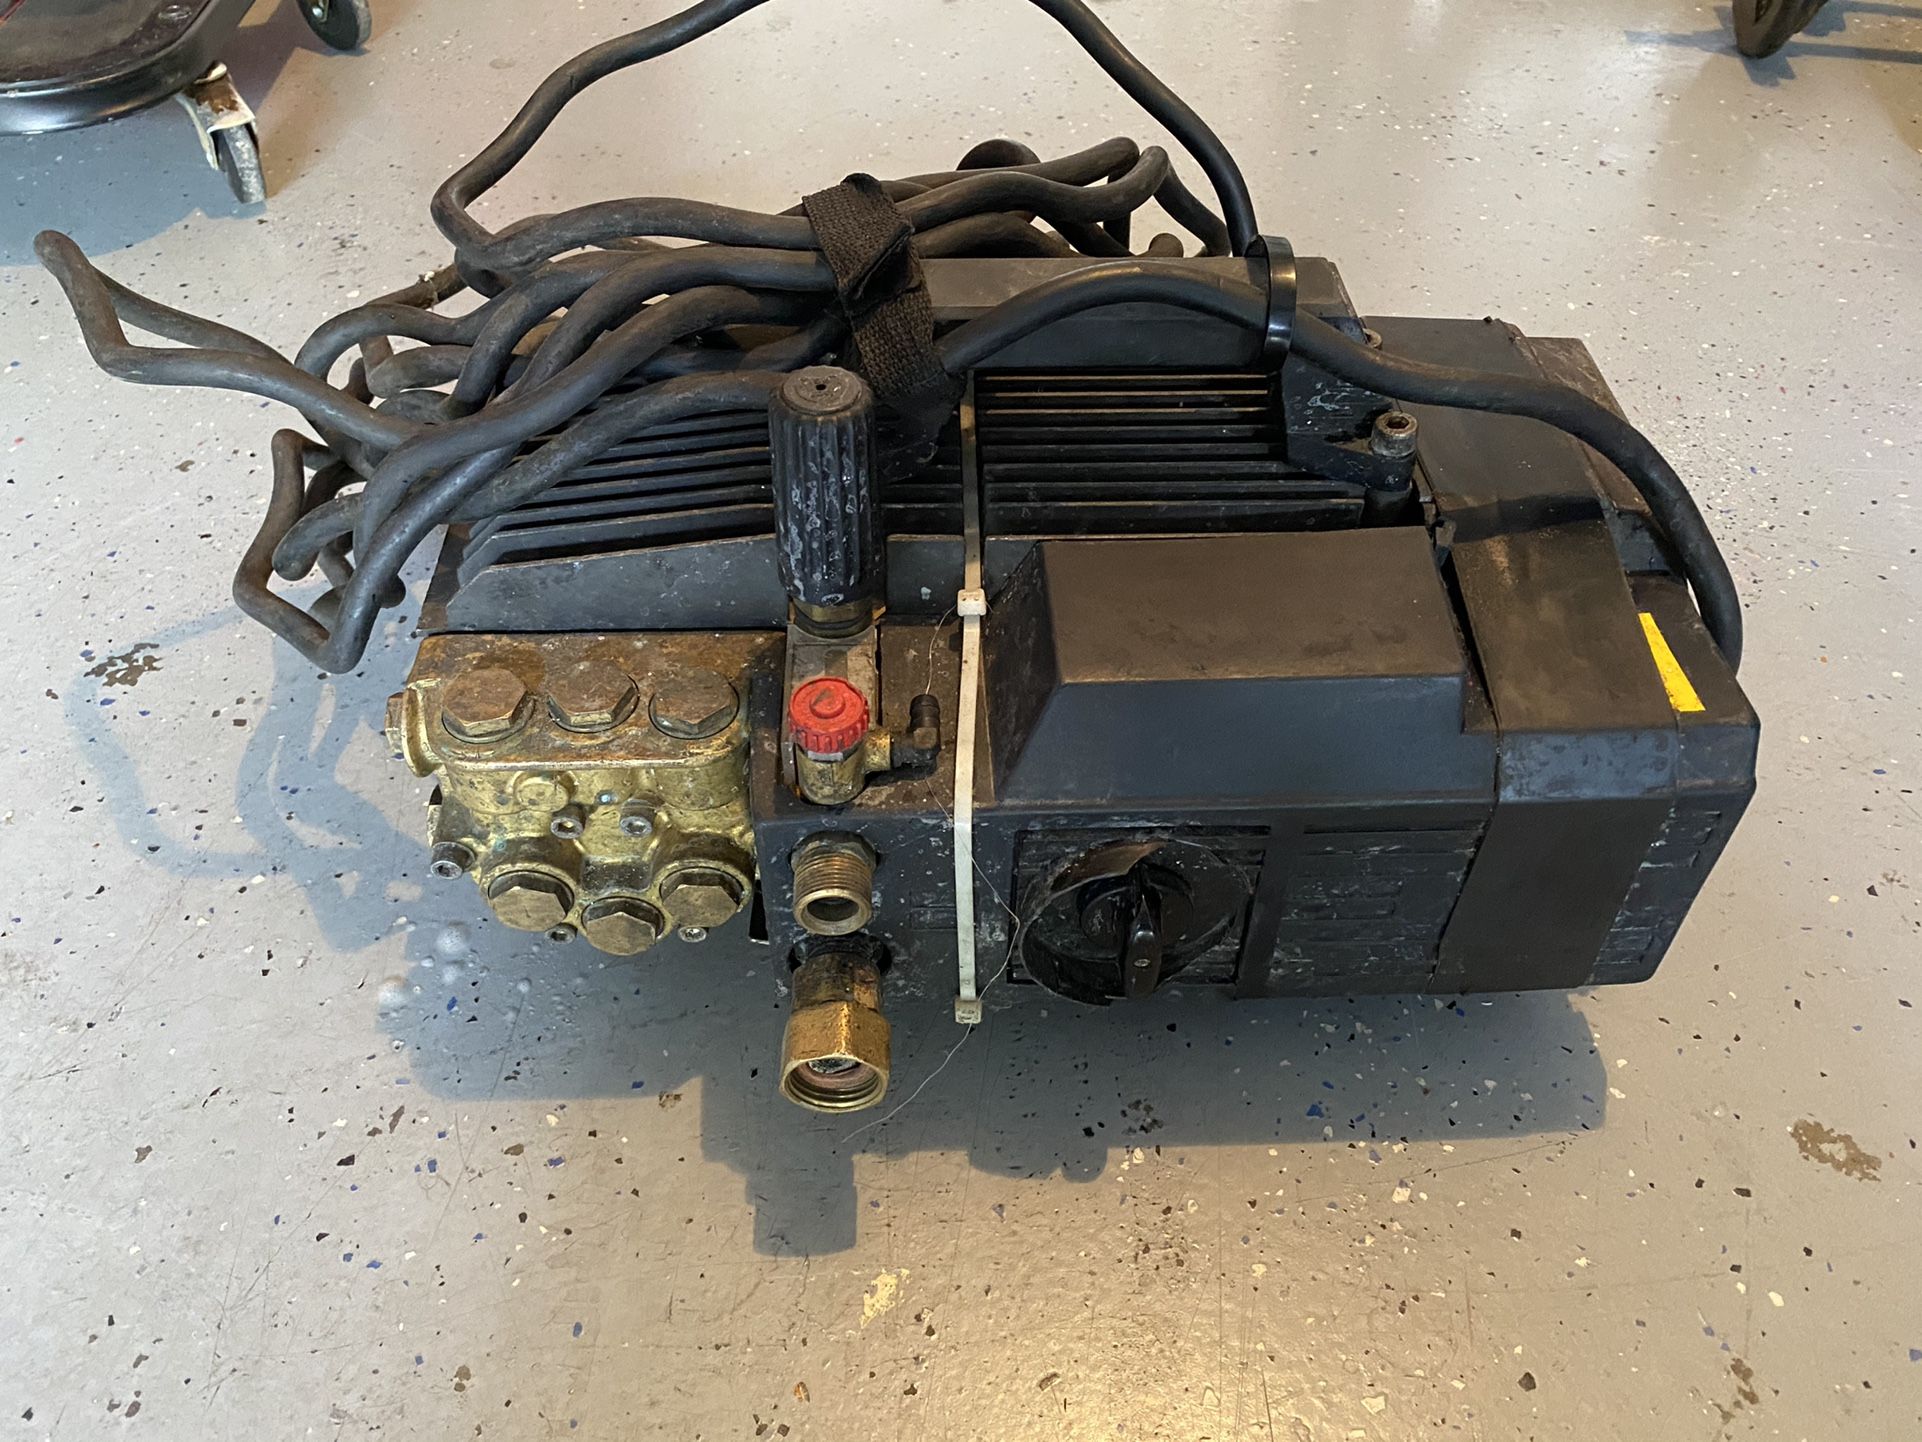 Electric Pressure washer 1300 PSI, Commercial grade